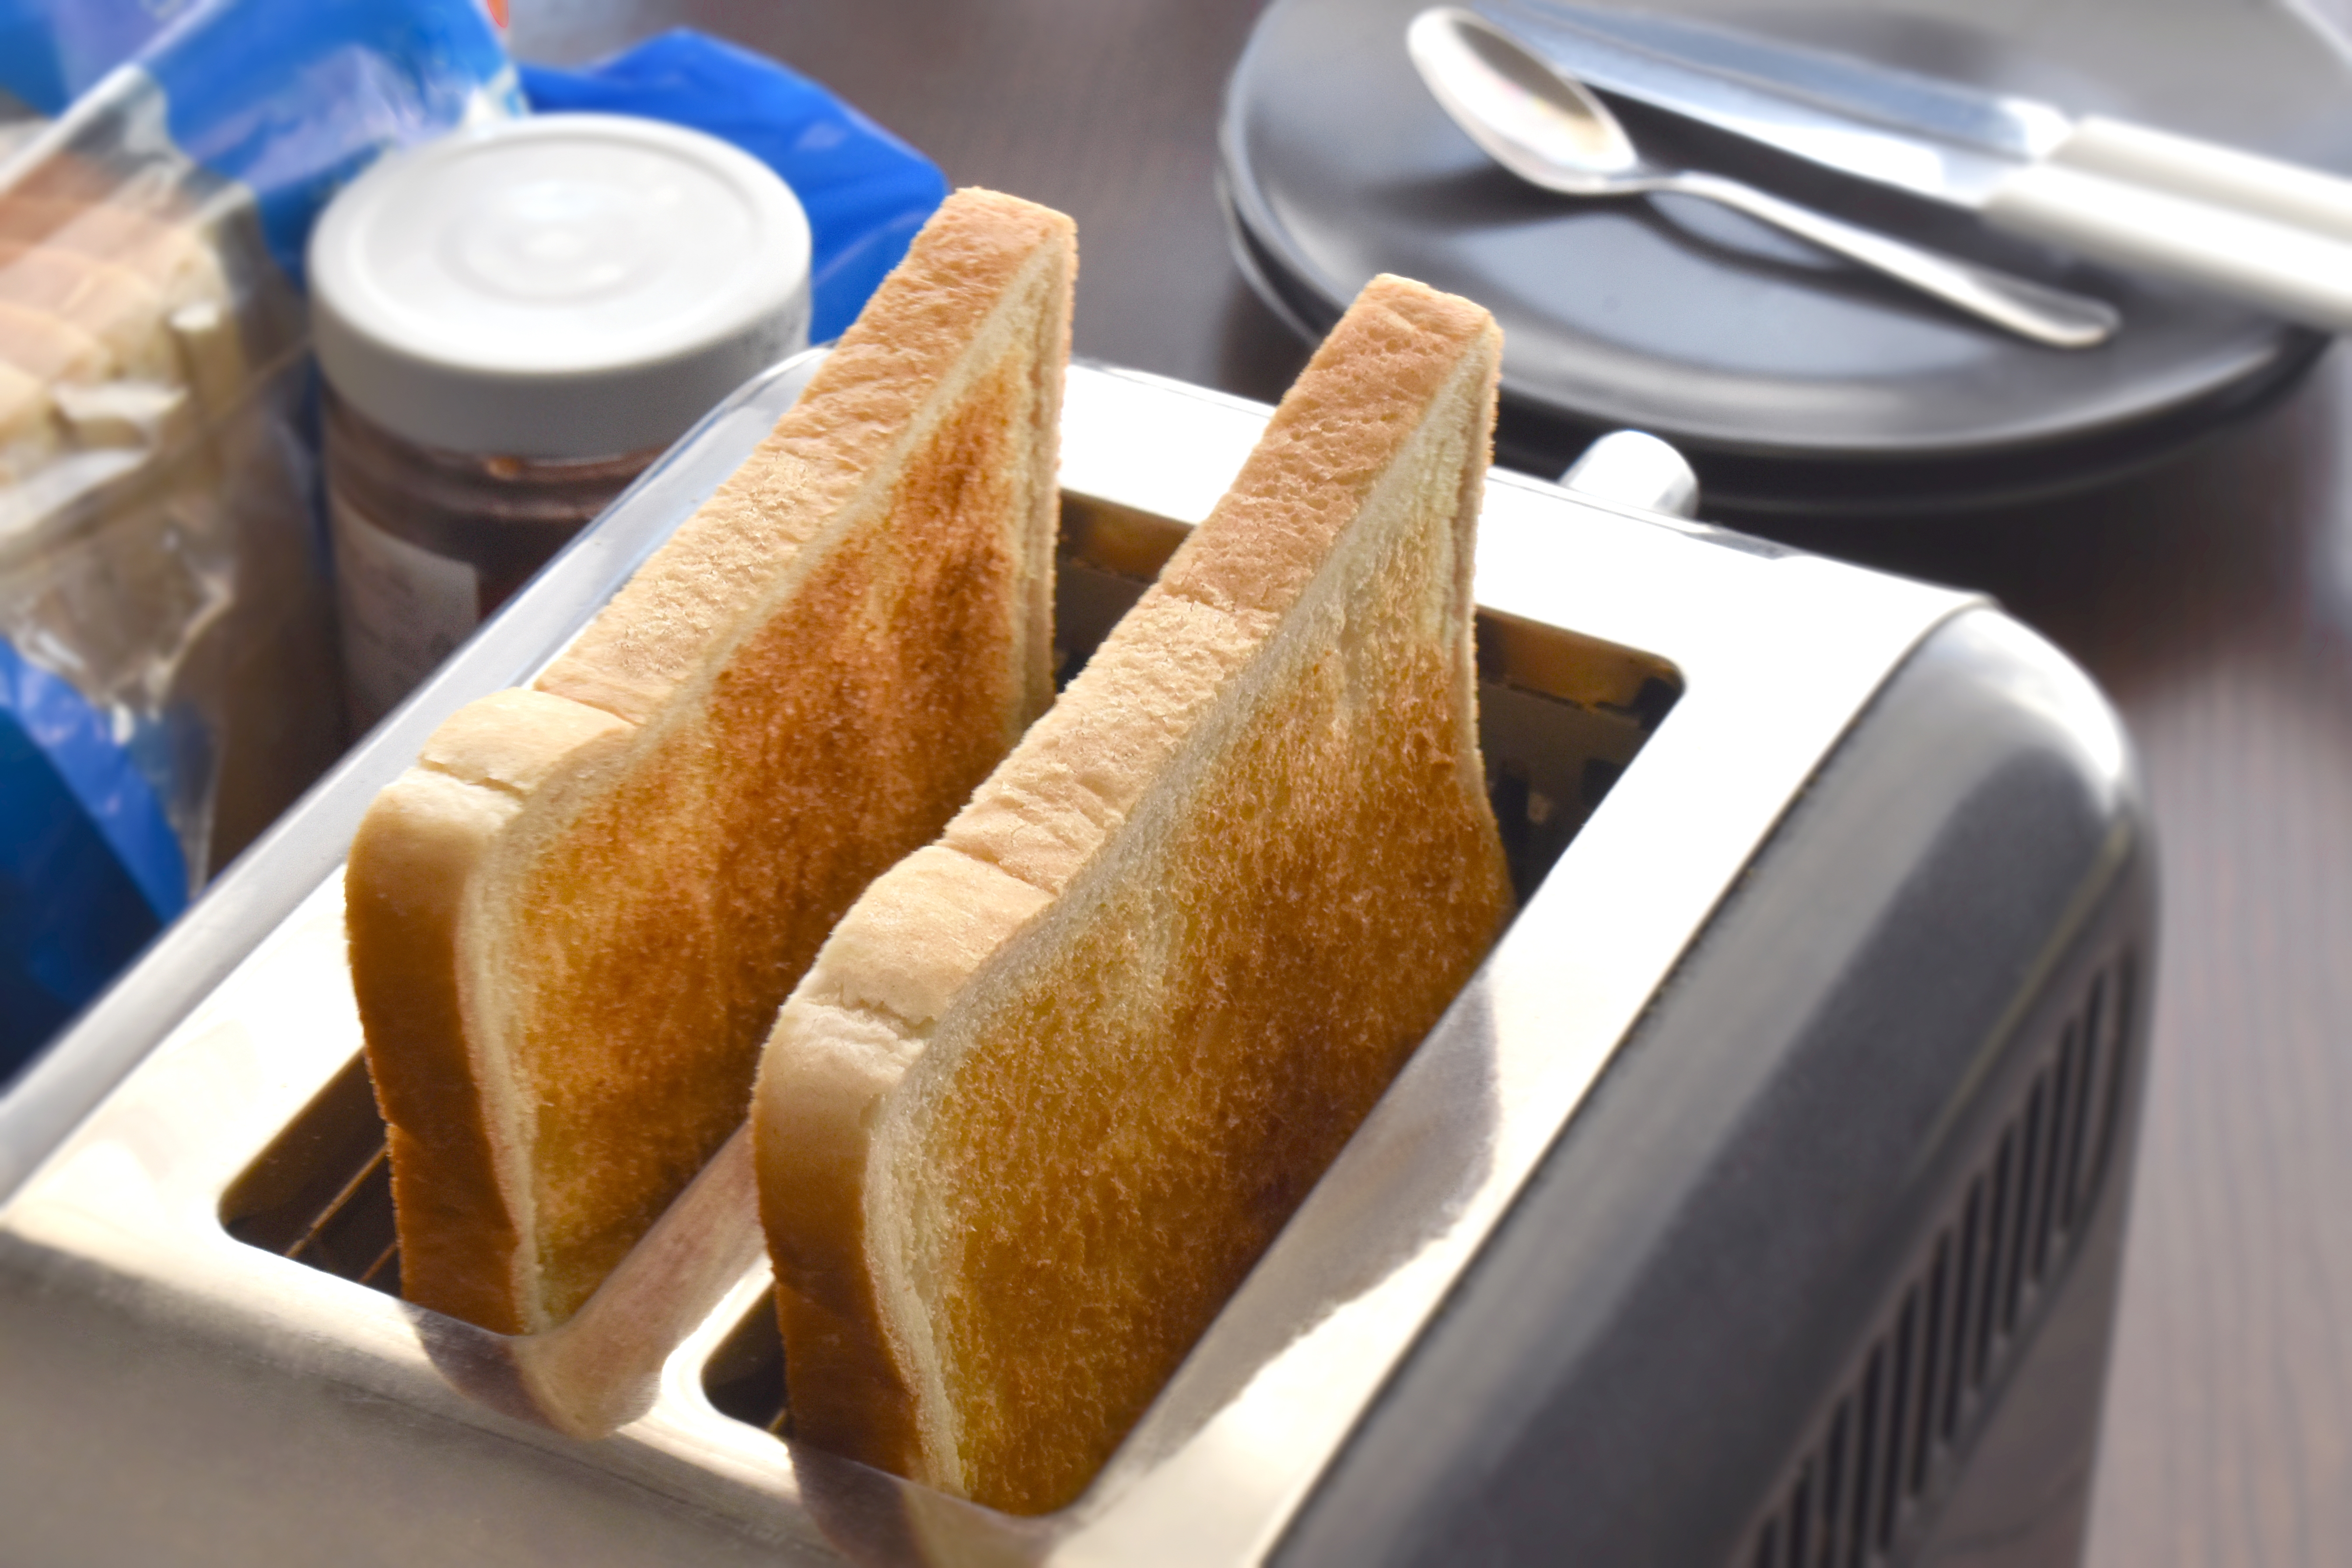 Toast in a toaster. Breakfast time at home.